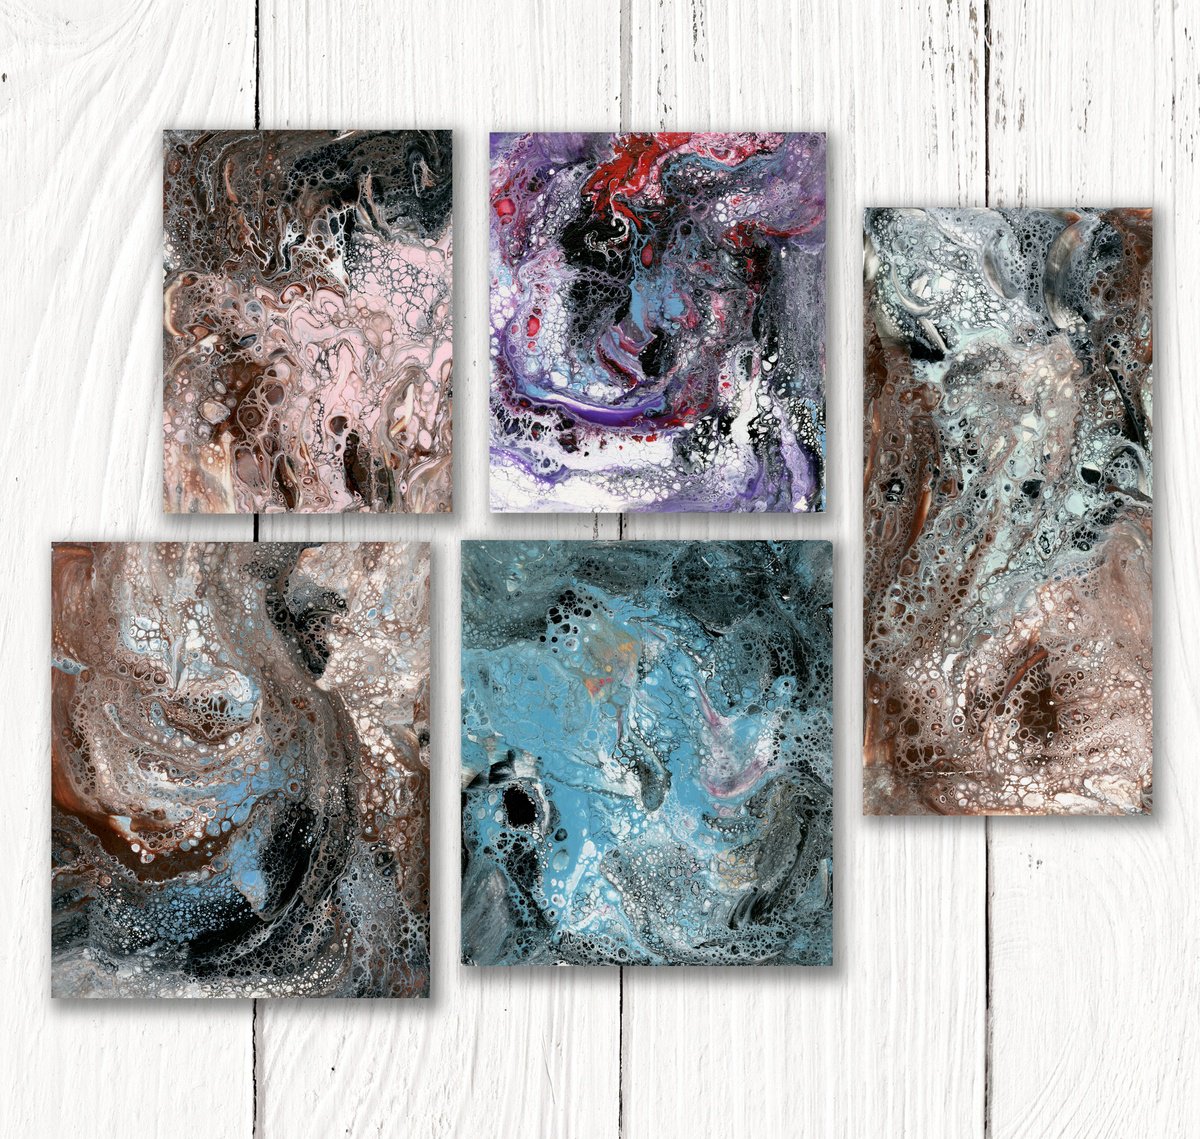 A Creative Soul Collection 3 - 5 Small Abstract Paintings by Kathy Morton Stanion by Kathy Morton Stanion